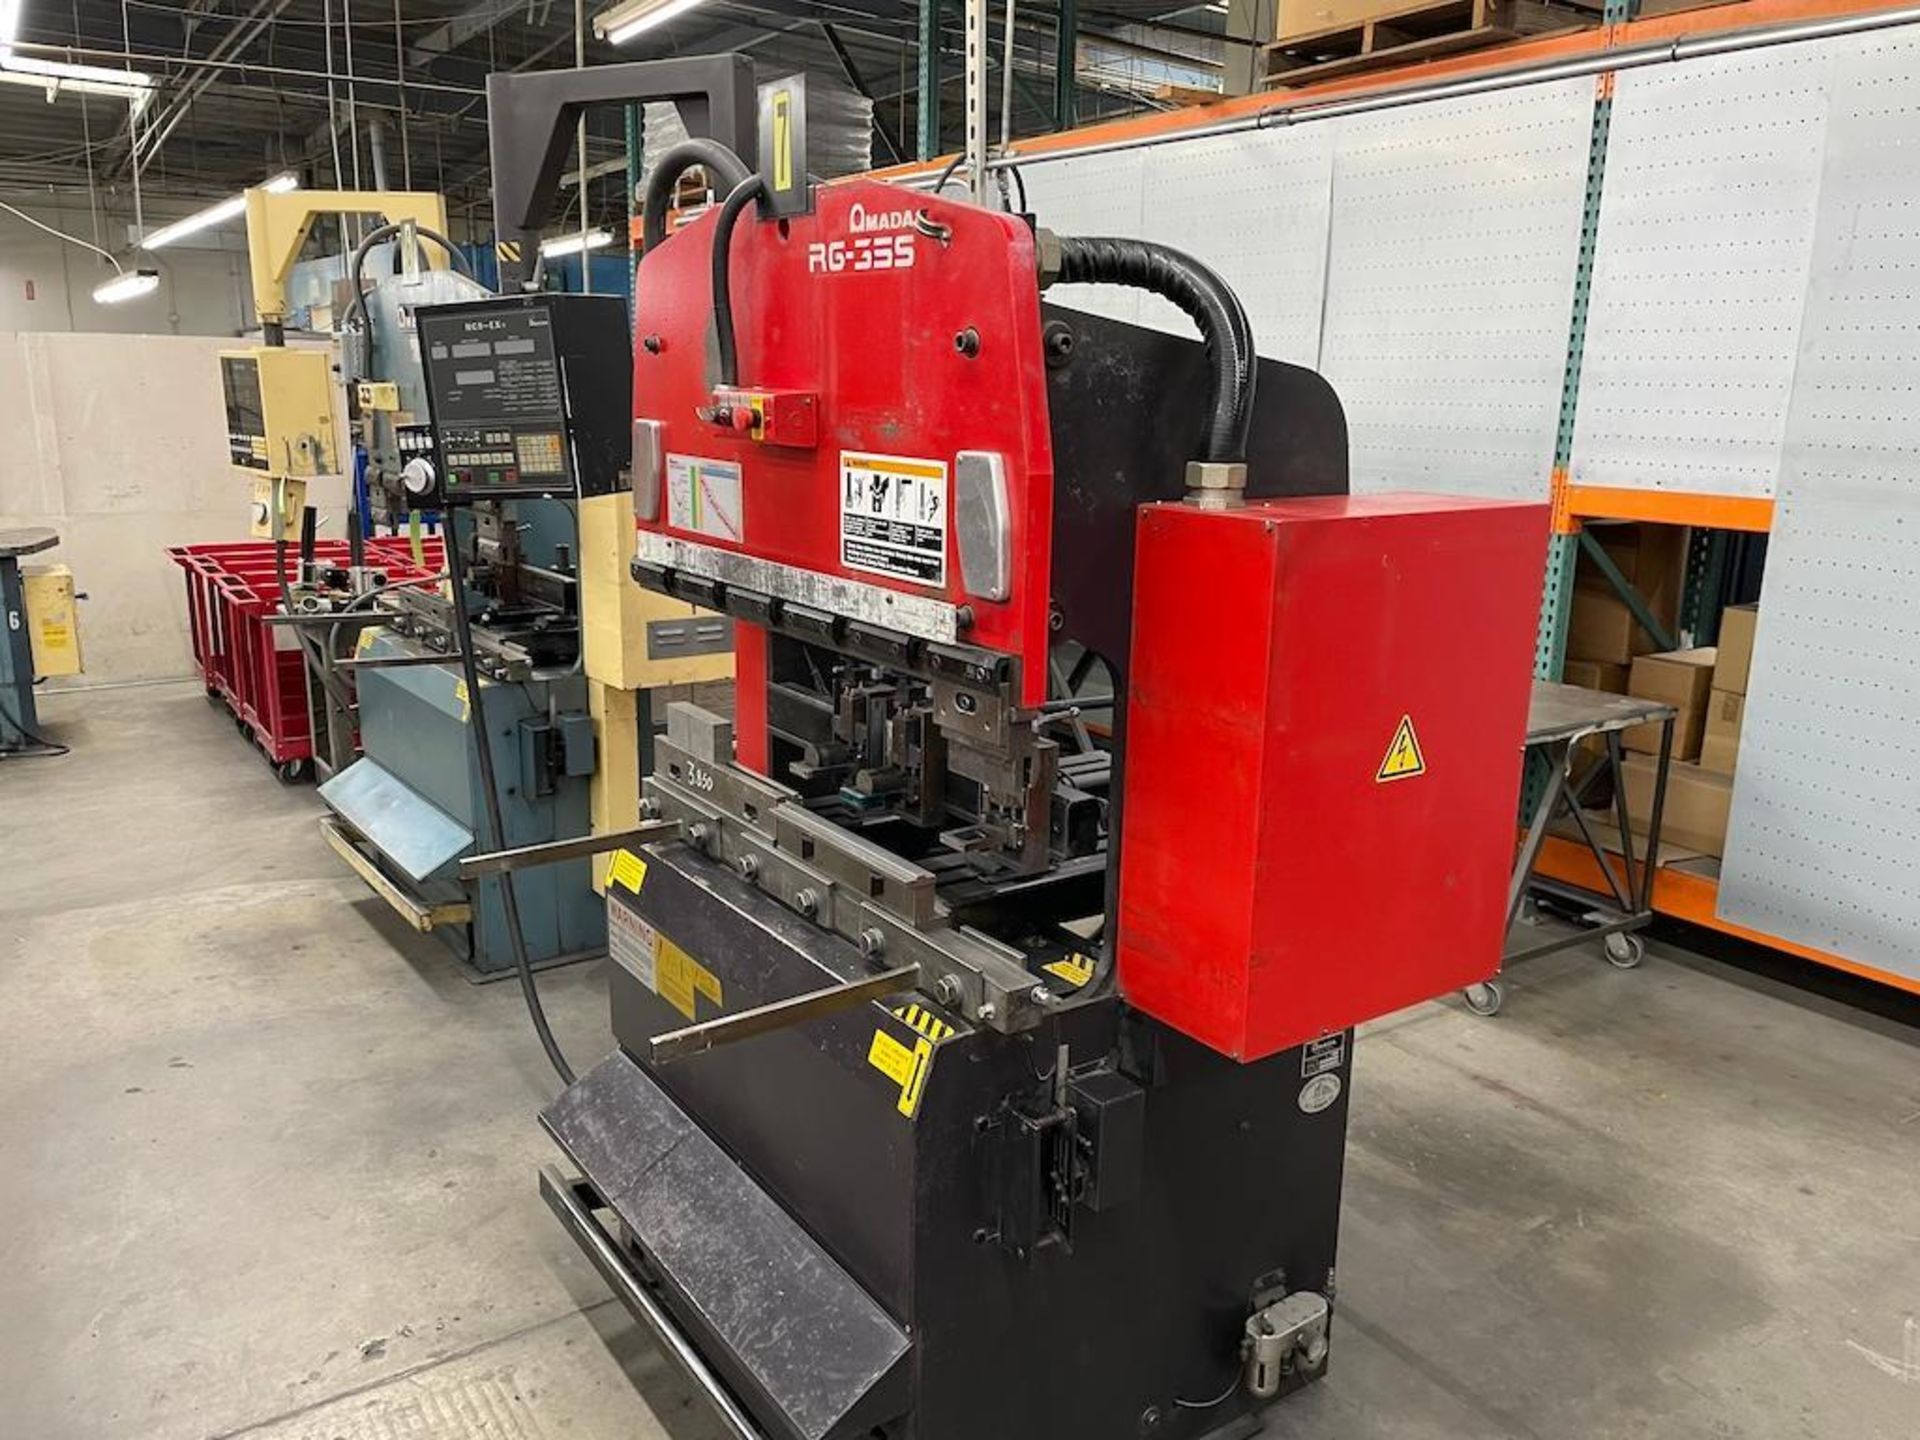 AMADA RG 35S PRESS BRAKE, 35 TON X 47.3 IN BED, NC9-EXII CONTROL, 2 AXIS BACK GAUGE, 47.3 IN BED, - Image 5 of 9